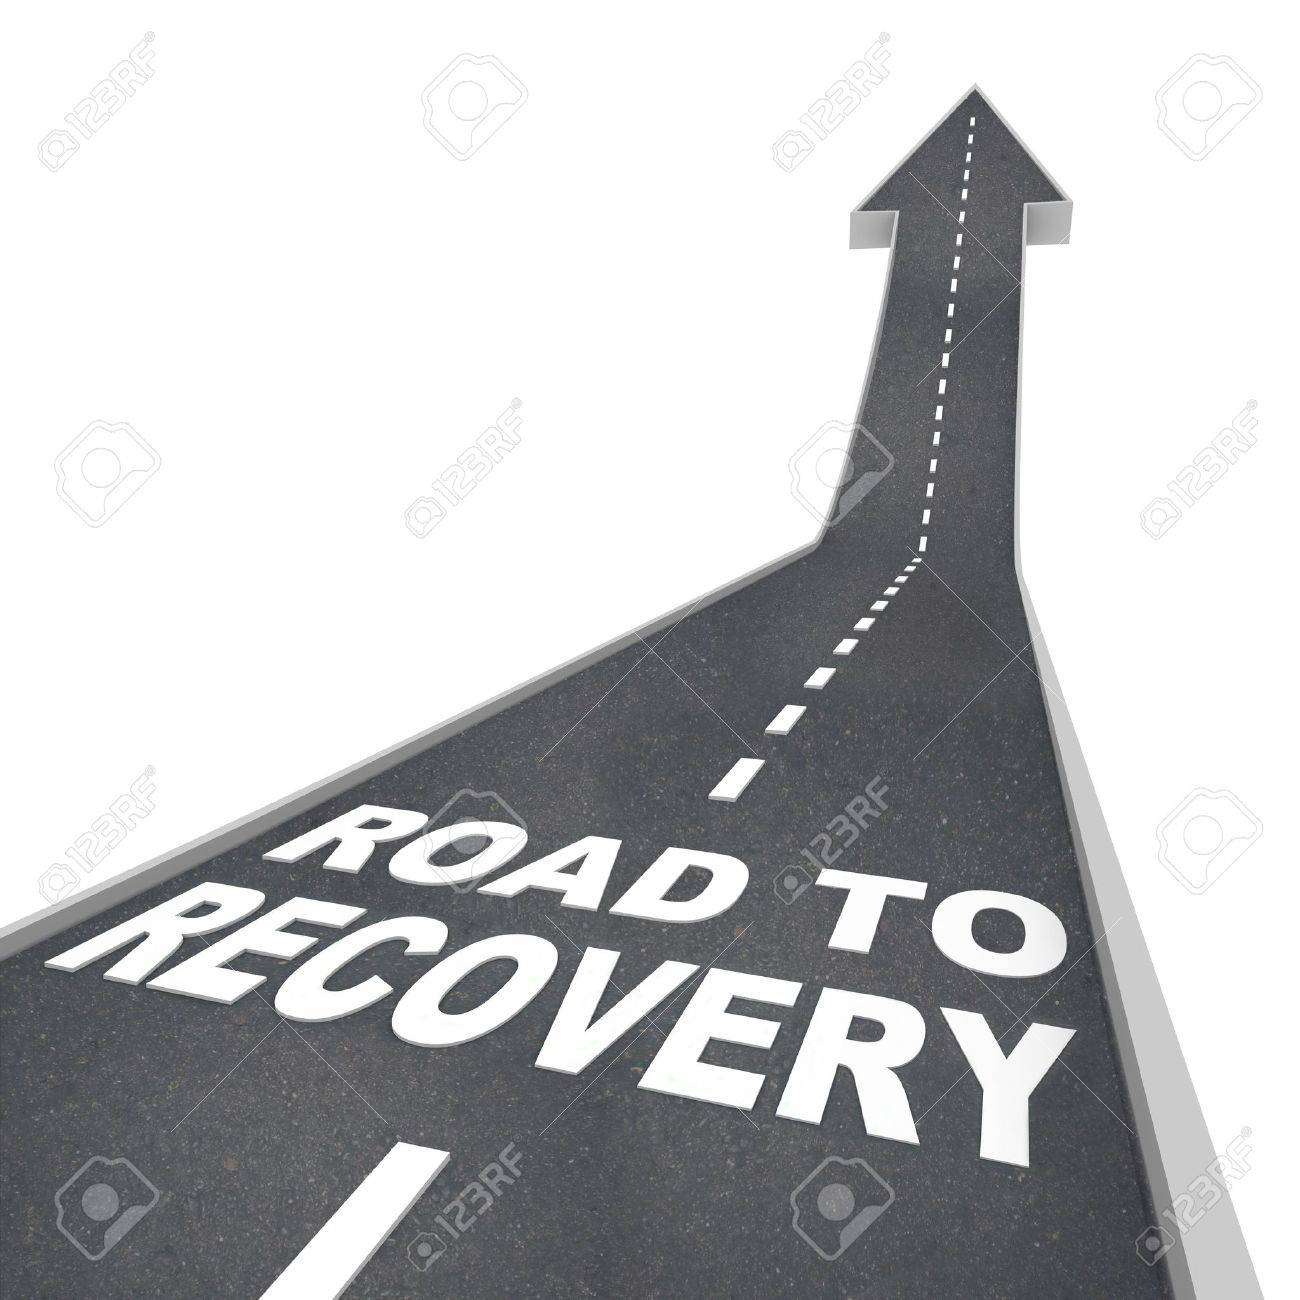 8088174-The-words-Road-to-Recovery-on-the-pavement-of-a-road-with-an-arrow-pointing-up-into-the-sky-Stock-Photo.jpg